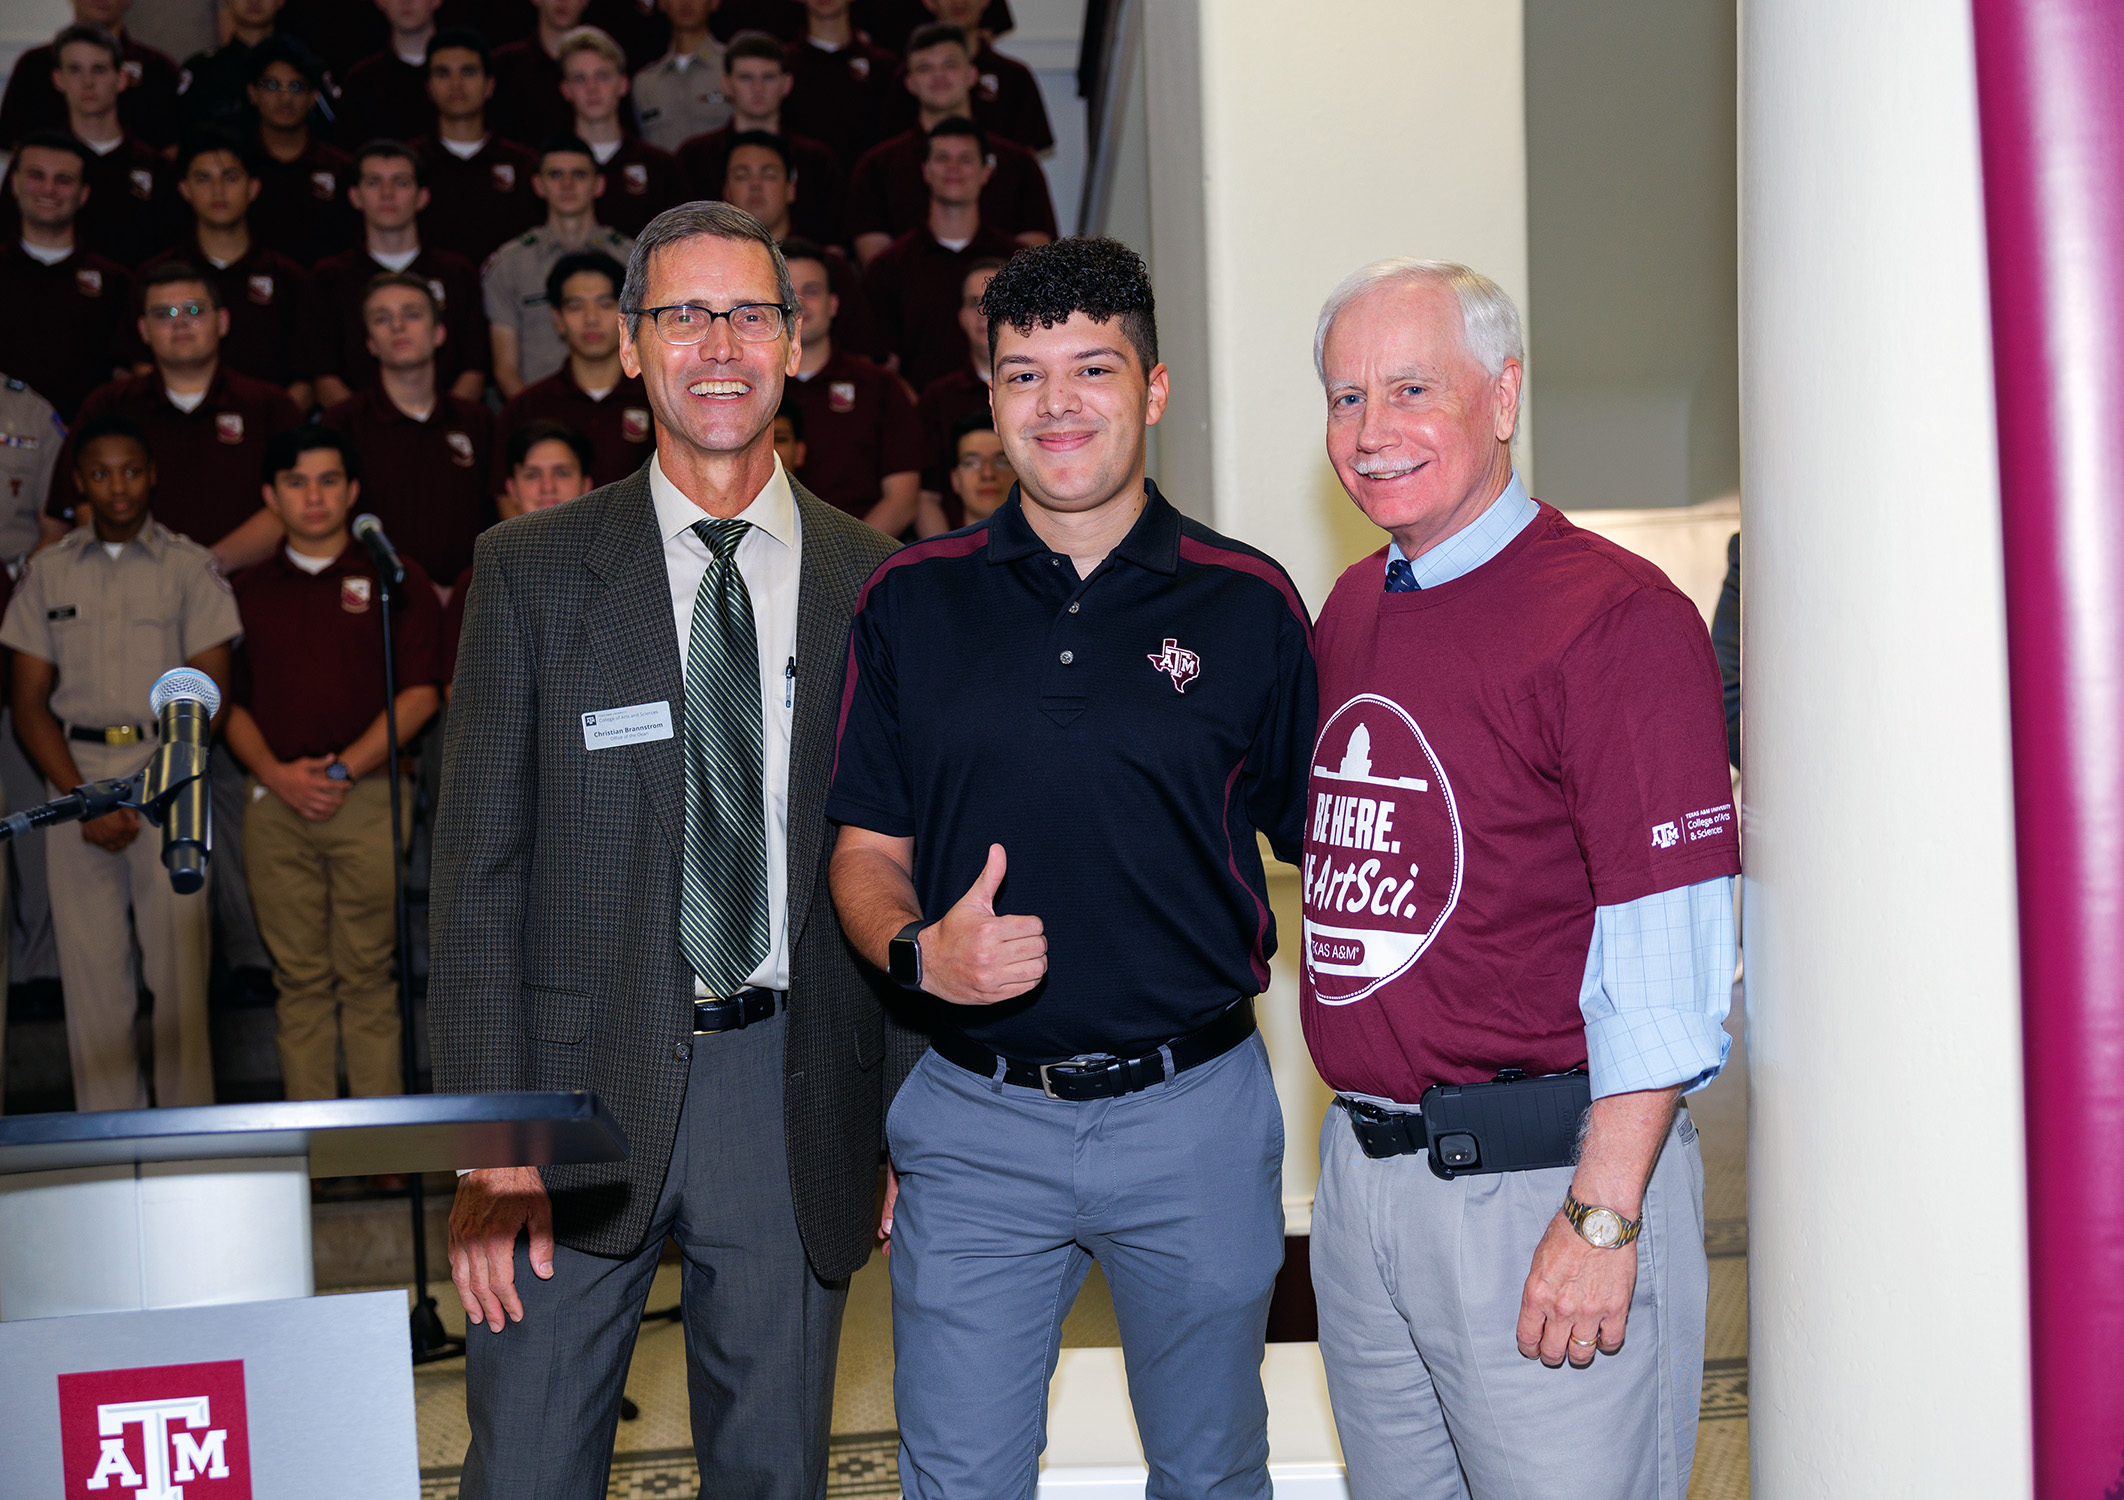 2020 Texas A&amp;M University sociology graduate Seth Crouch (center), flanked by Arts and Sciences Senior Associate Dean for Undergraduate Education Dr. Christian Brannstrom (left) and Interim Dean Dr. Mark Zoran (right) at the ArtSci Party at the Plaza event held on Nov. 4, 2023.